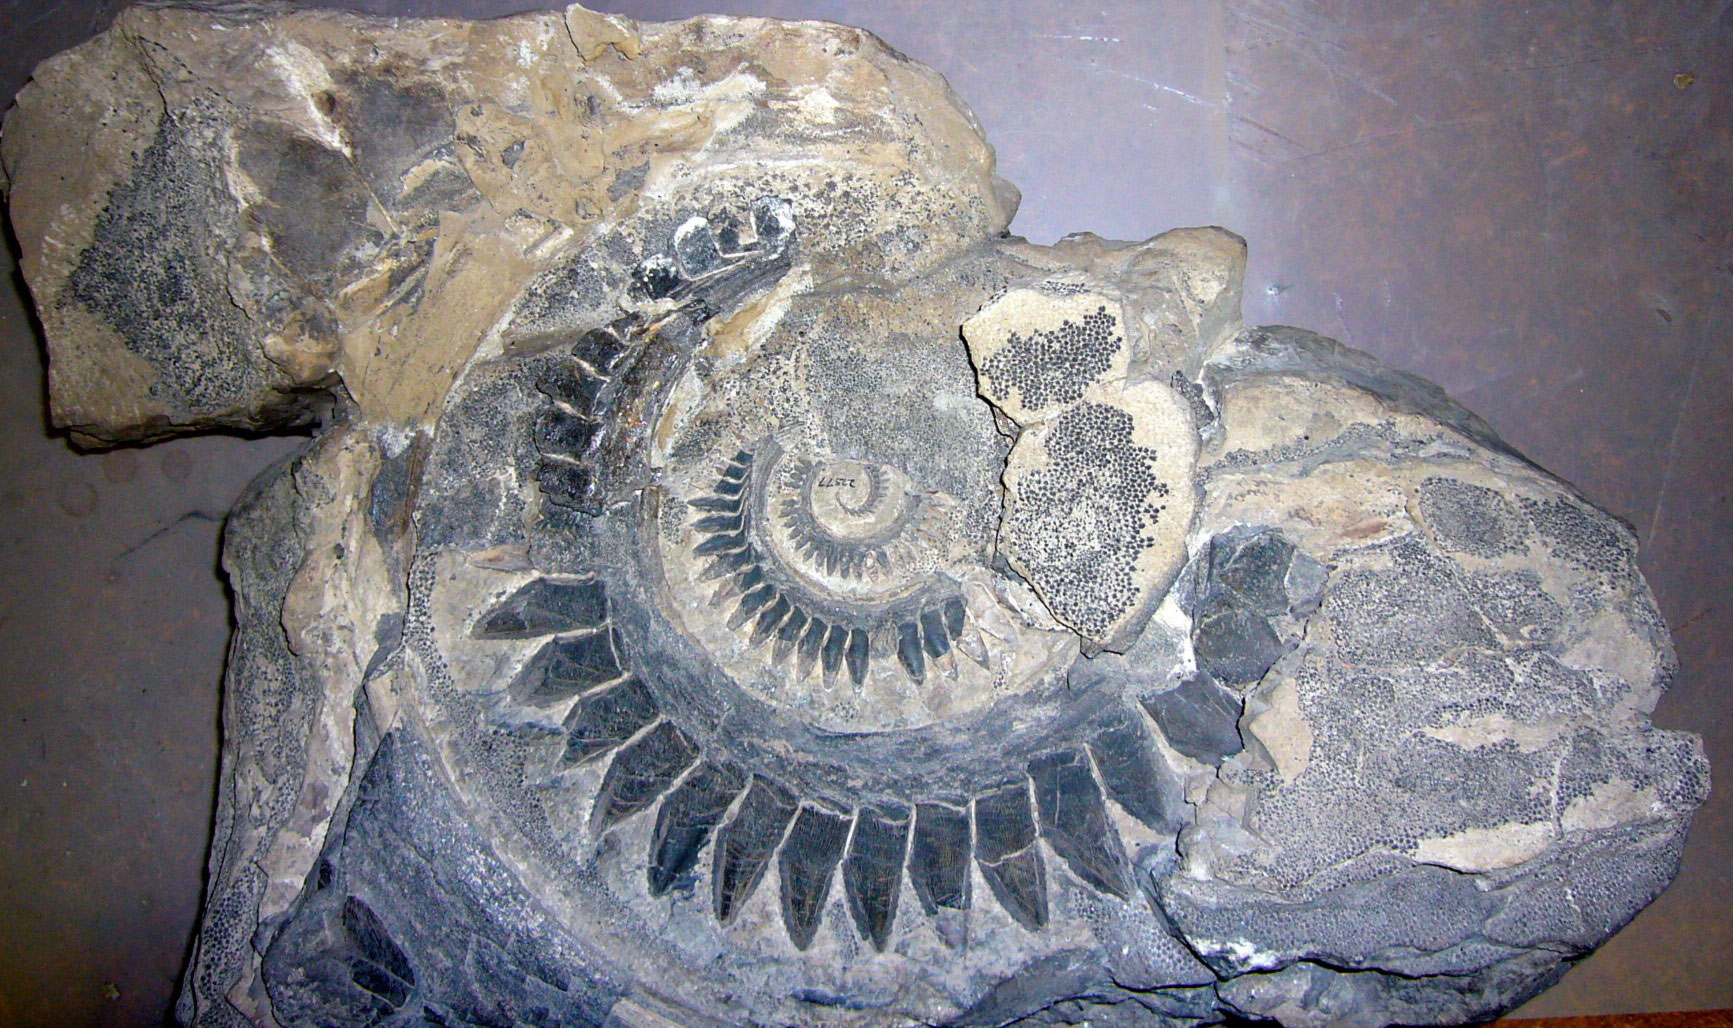 Photograph of the tooth whorl of a shark from the Permian of Idaho. The photo shows teeth arranged in a spiral, with their tips pointed outward and their bases inward. Gray areas around the teeth, some appearing pebbly, are presumably other parts of the shark.